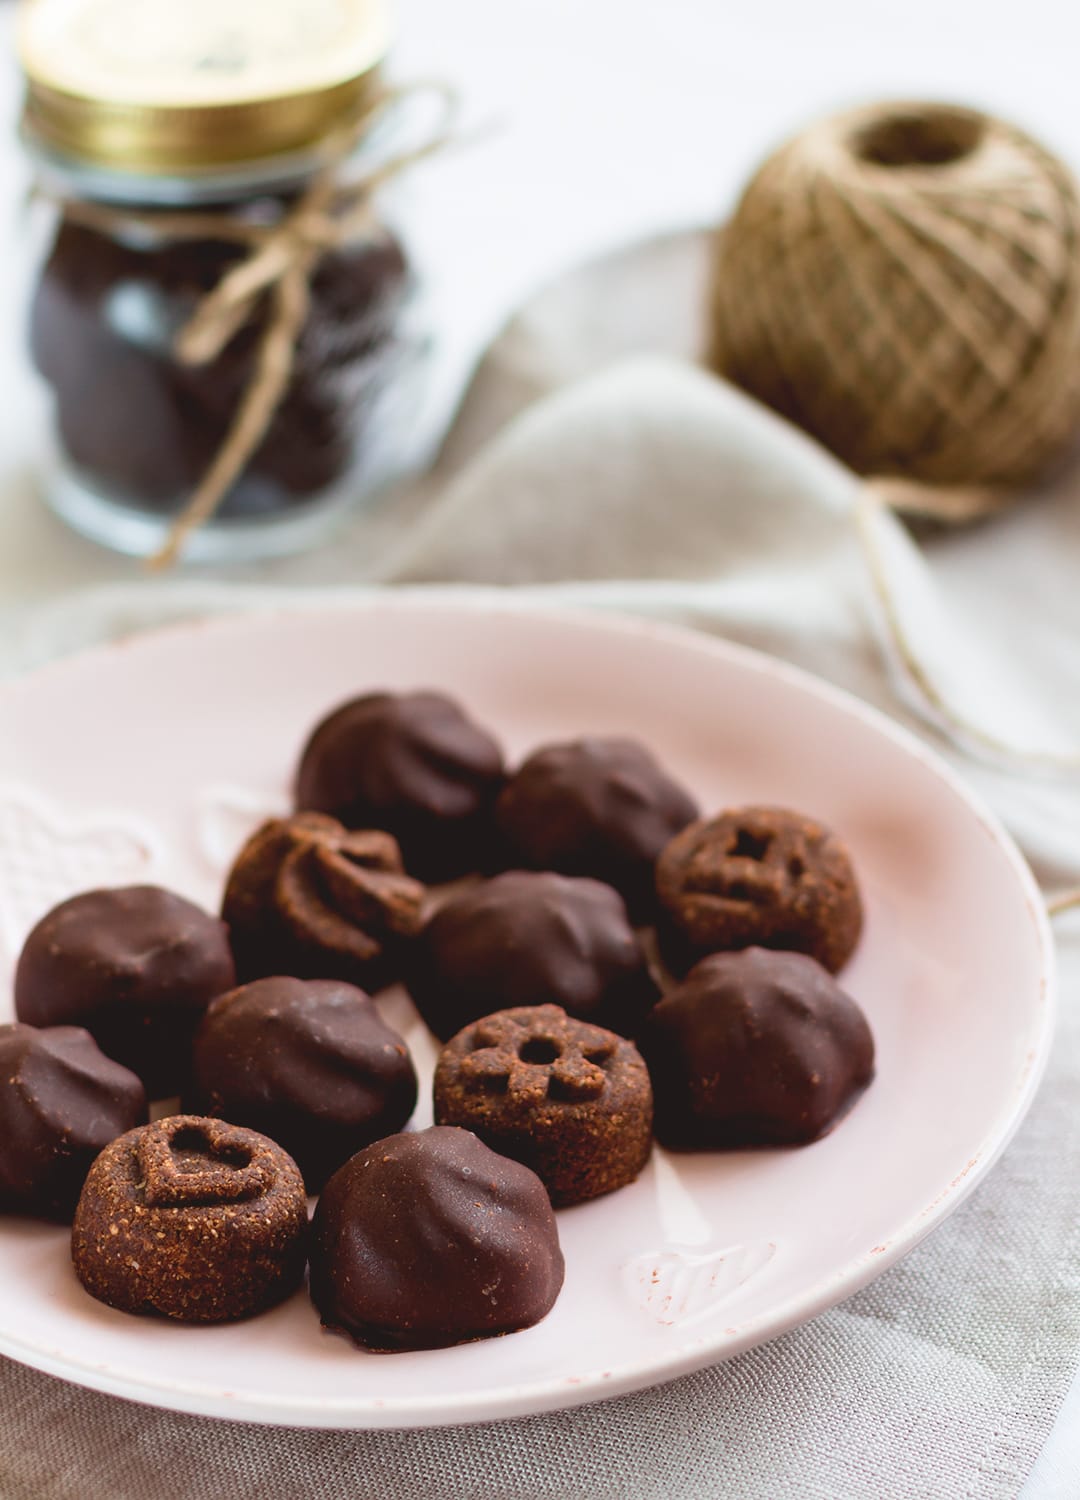 Raw Chocolate Covered Cookies - vegan and delicious, these chocolatey cookies are actually healthy! Great for Valentine's Day or any other day of the week when you're craving something sweet! Store them in the fridge or in the freezer. | thehealthfulideas.com